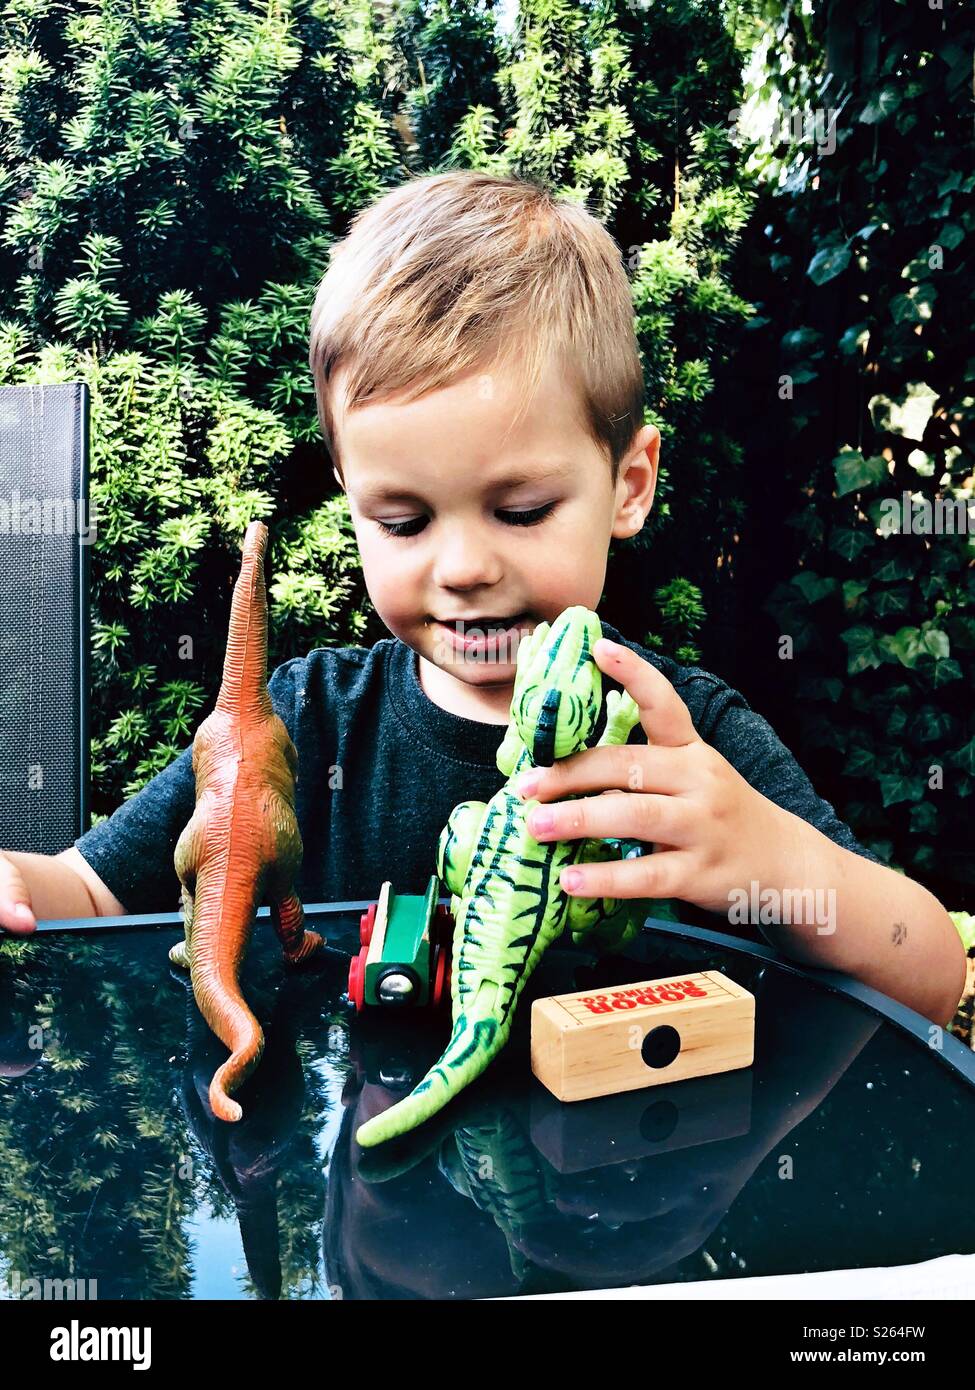 A boy playing with toy dinosaurs outside Stock Photo